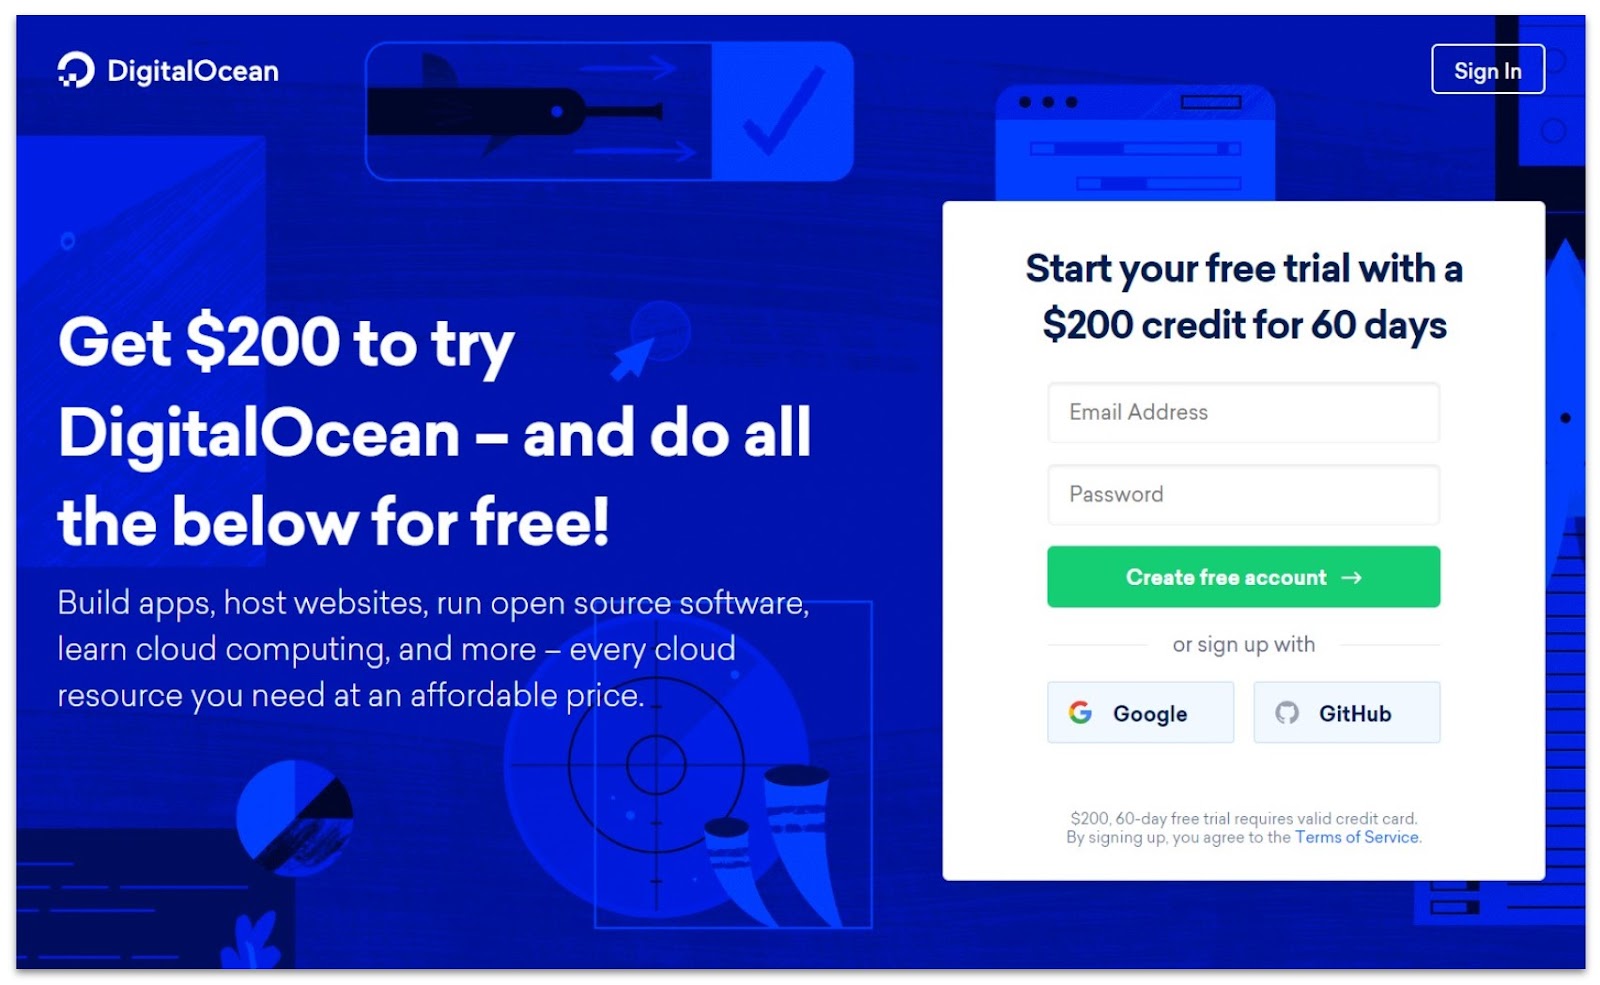 DigitalOcean 60-day trial with $200 credit offer landing page